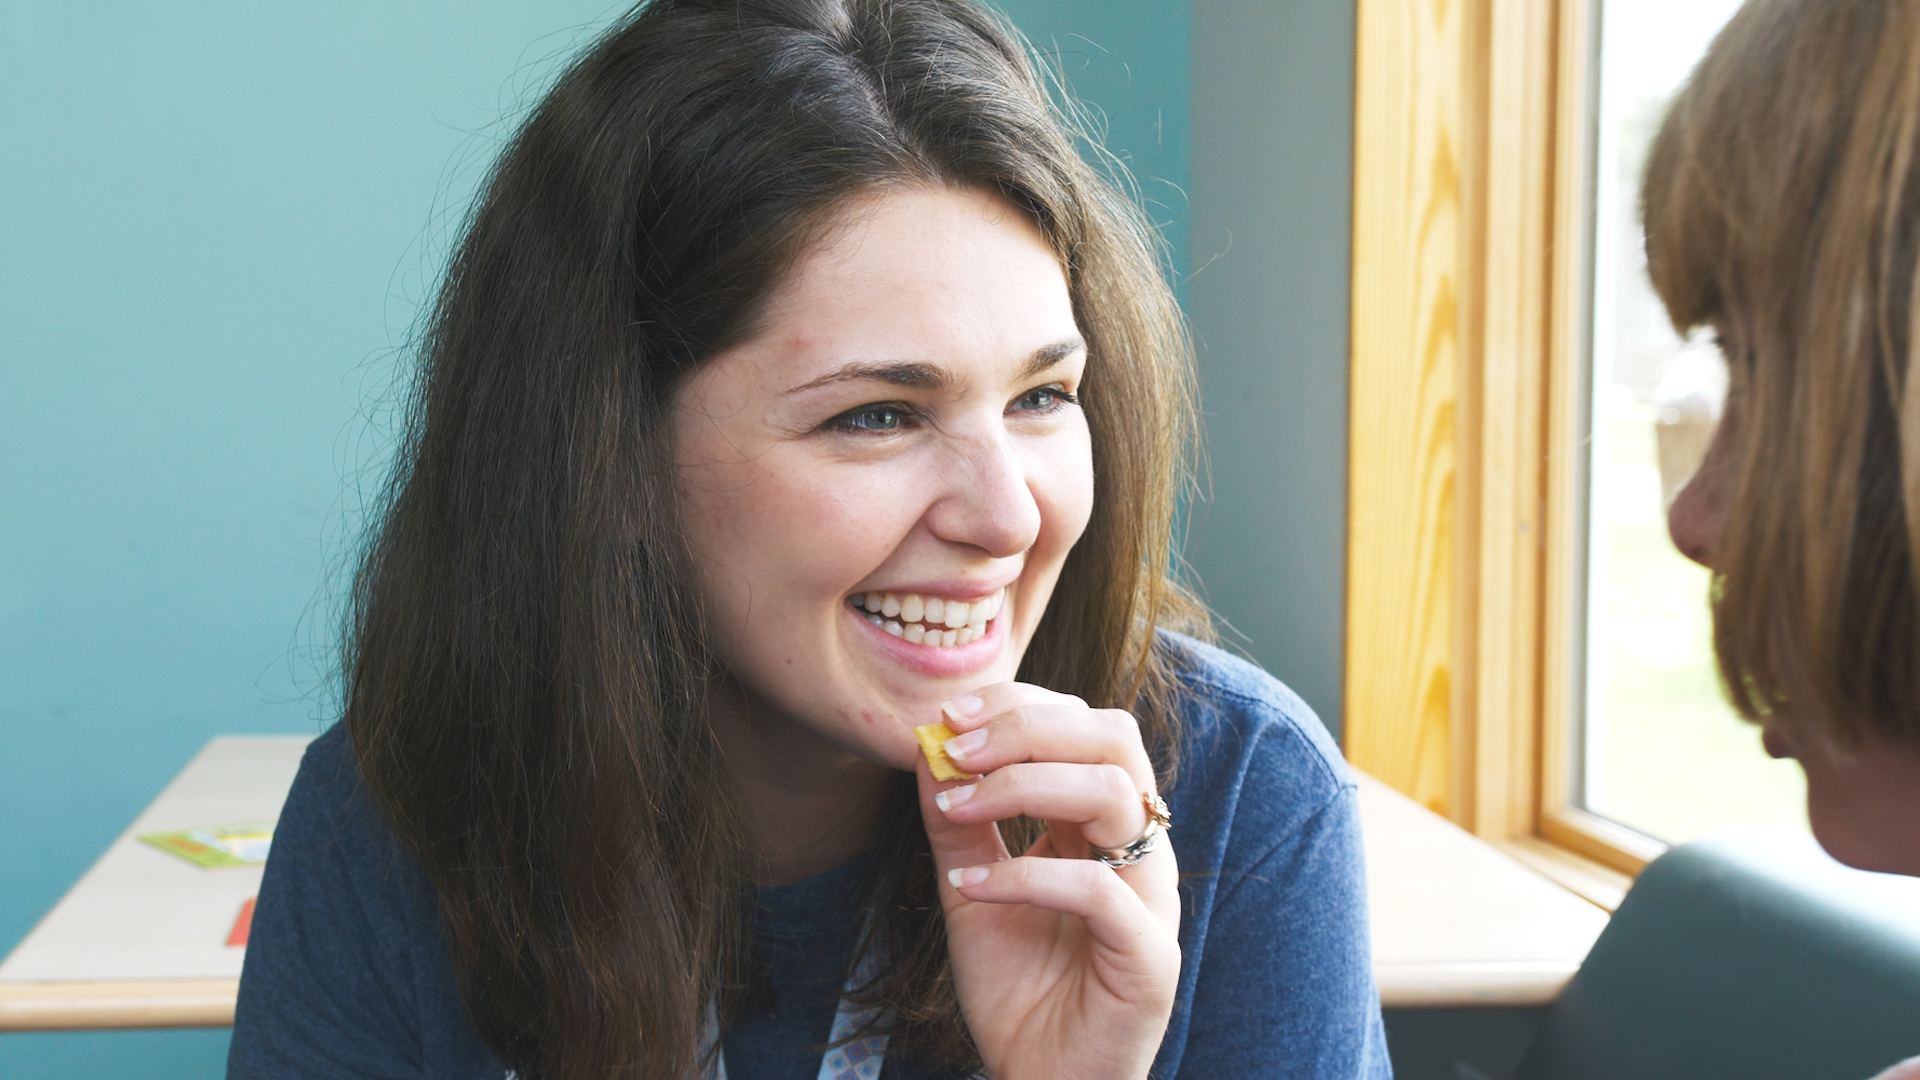 Adult woman in a blue shirt smiling and laughing while holding a small object in her hand